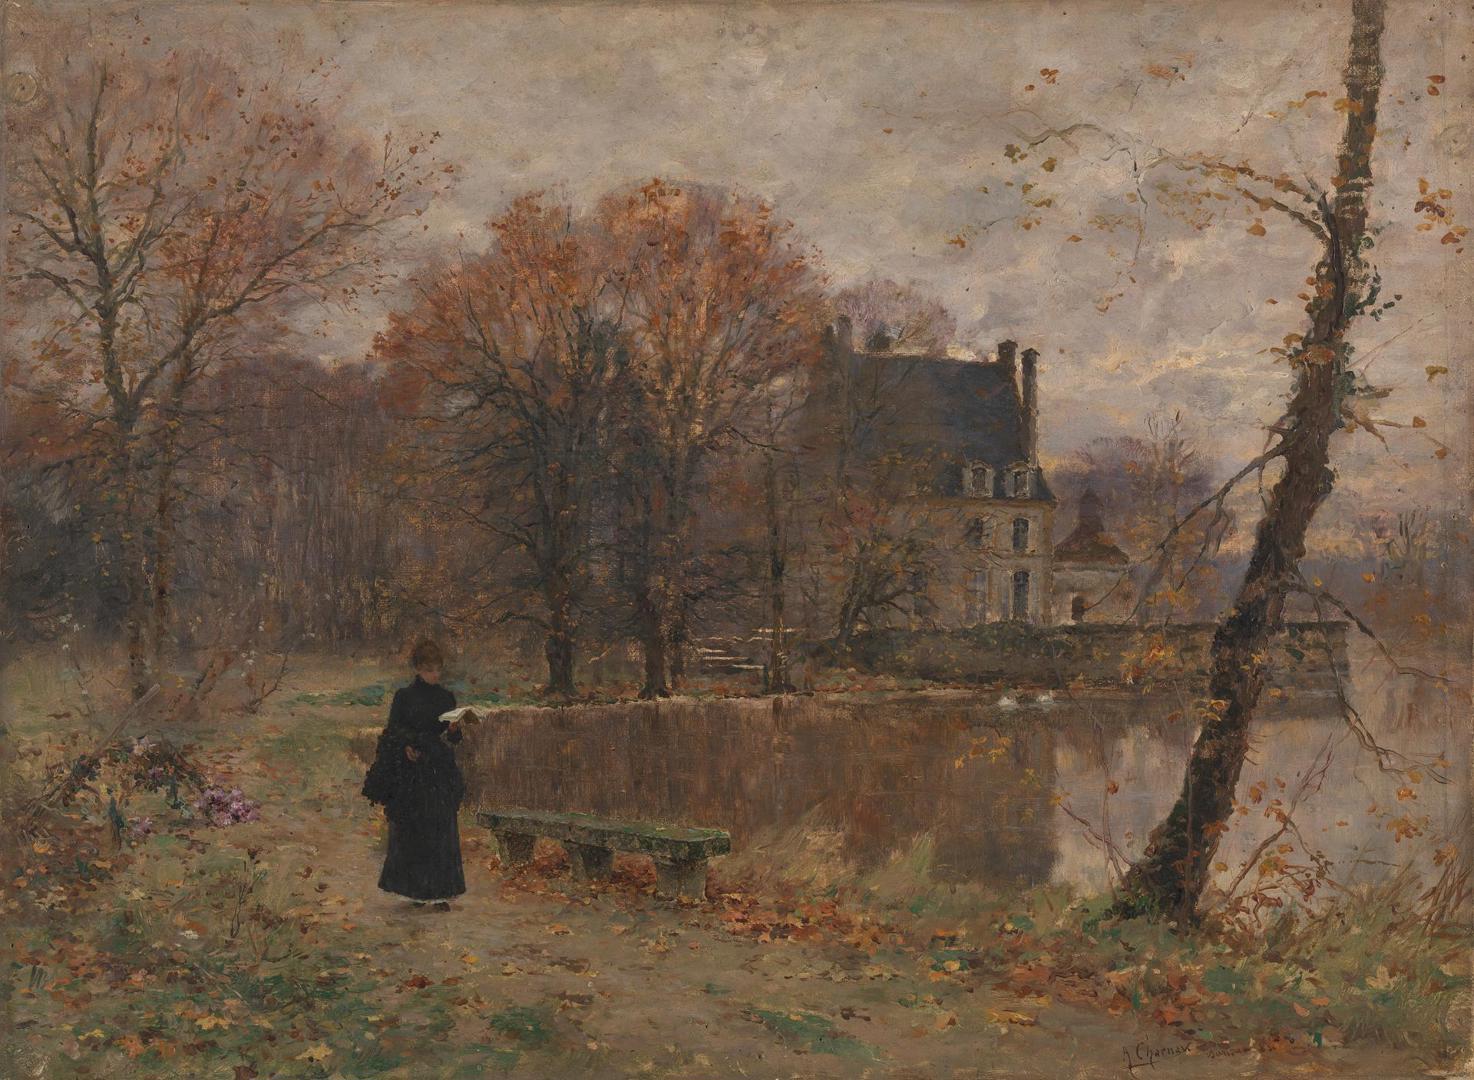 Park of Sansac (Indre-et-Loire) by Armand Charnay